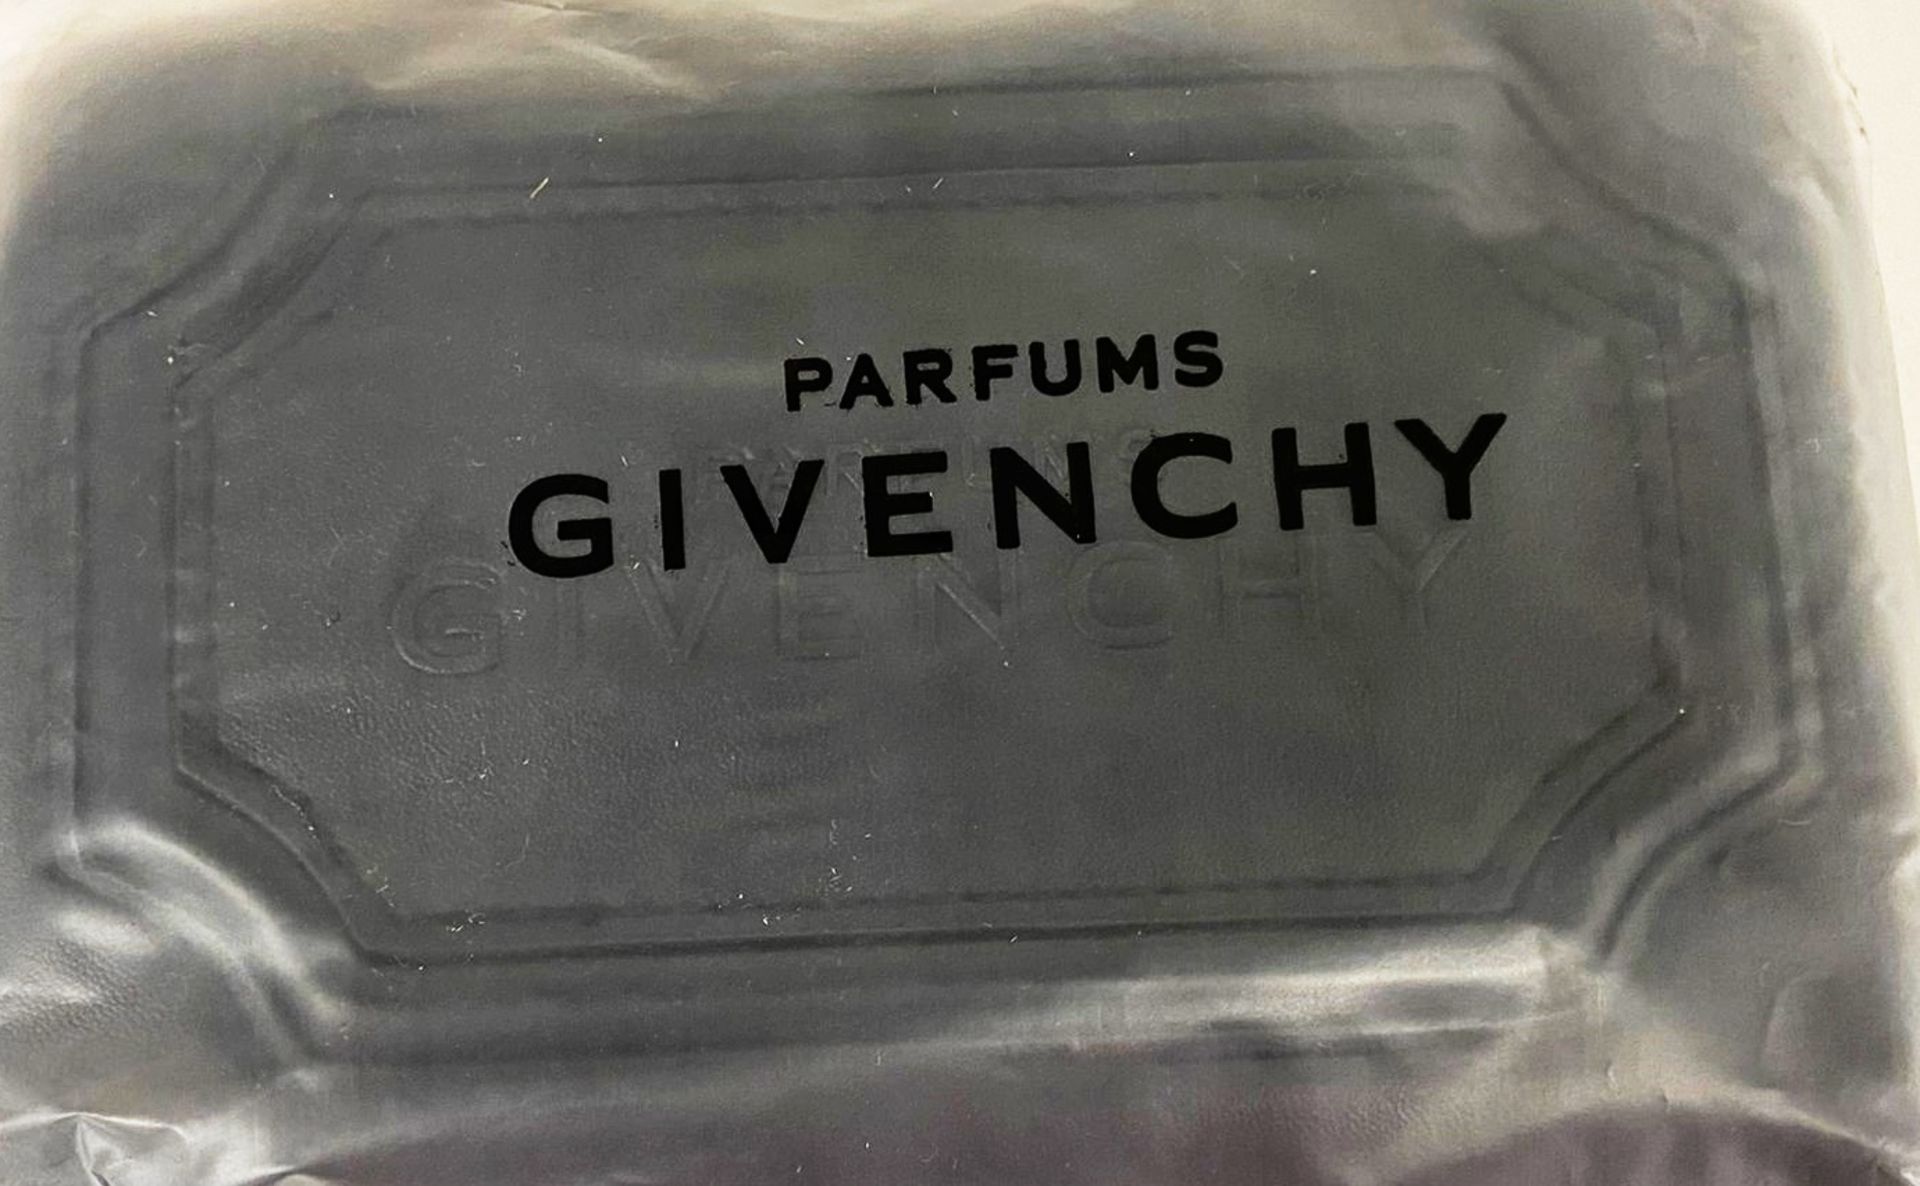 10 x GIVENCHY Parfums Kits With Carrying Case And Irresistible Spray - Image 2 of 4